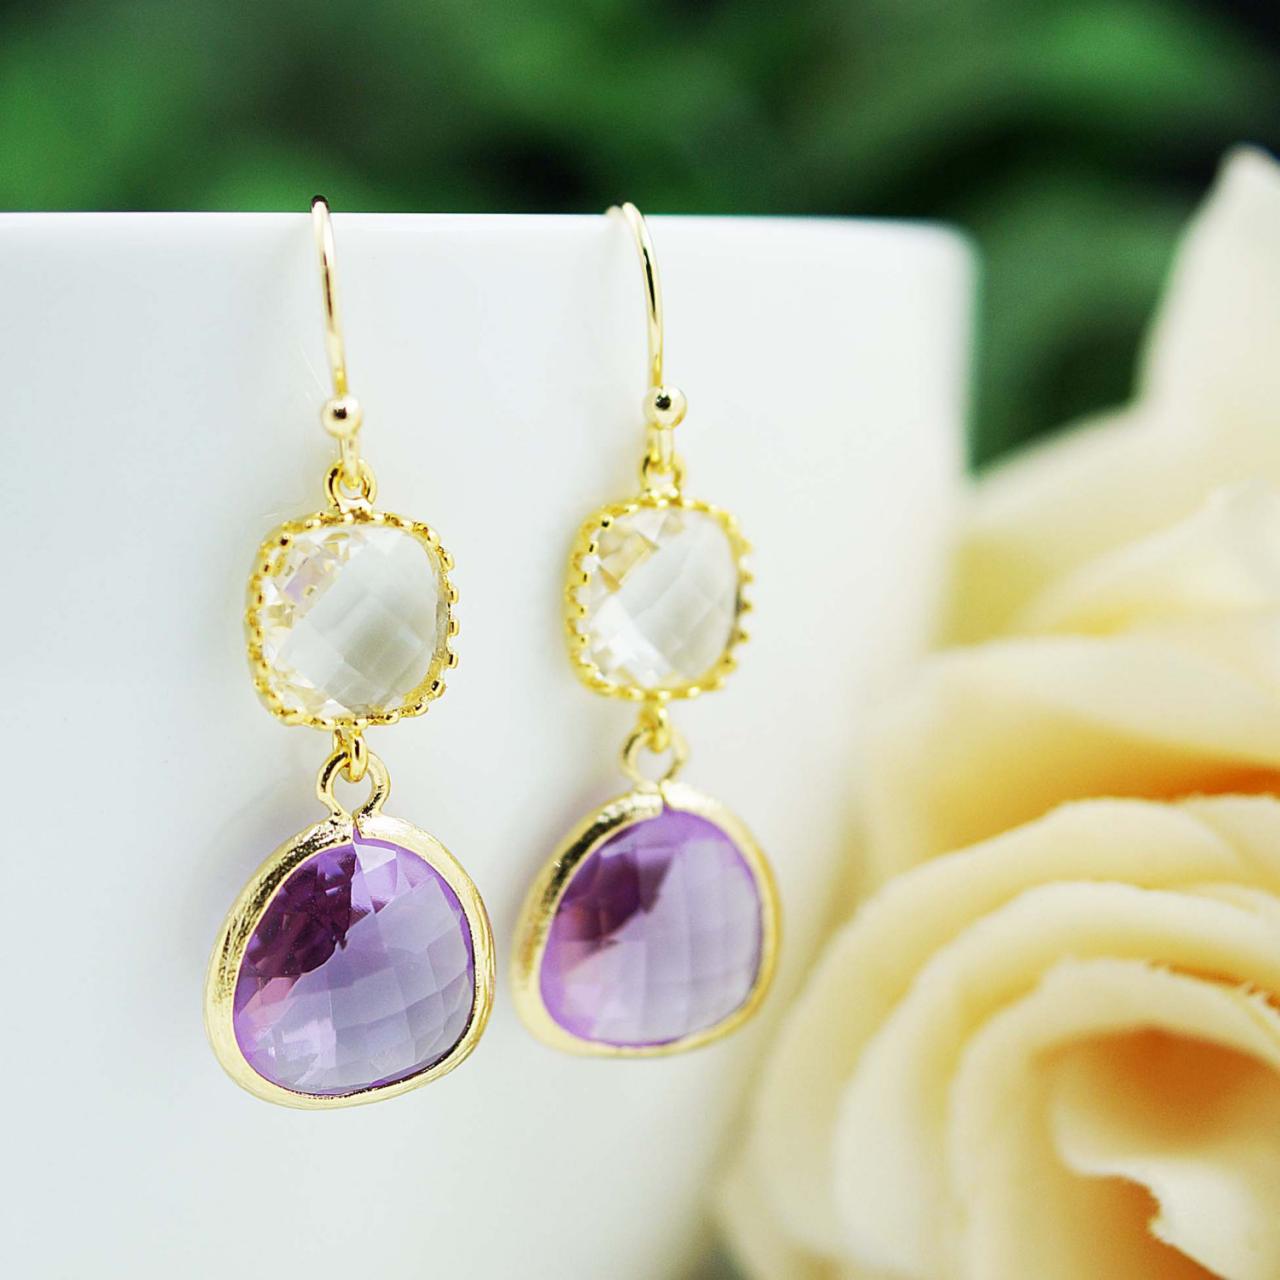 Wedding Jewelry Bridesmaid Gift Bridesmaid Earrings Dangle Earrings Gold Framed Clear White And Dark Lilac (purple) Glass Drop Earrings